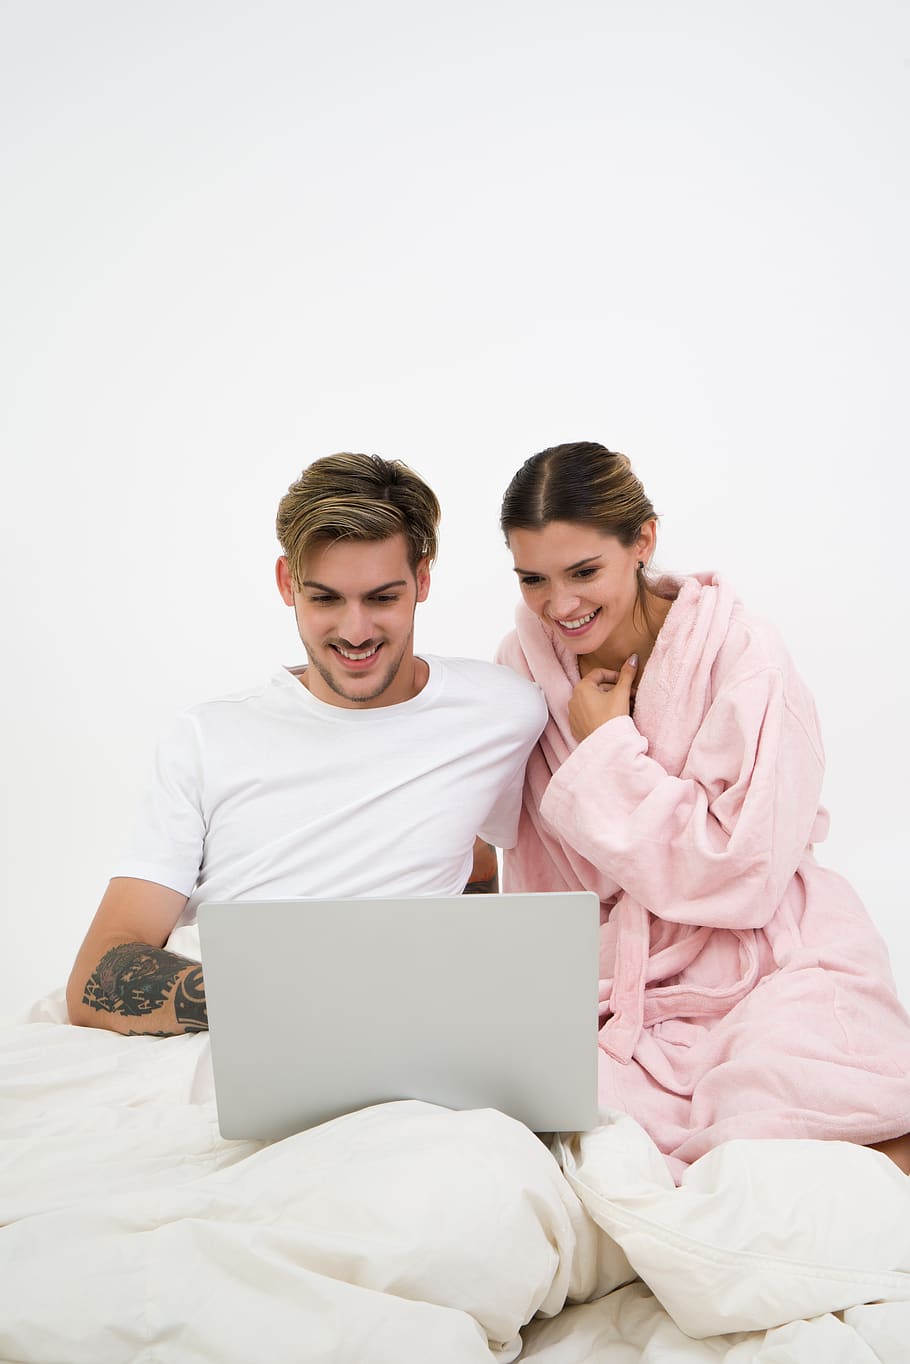 couple, smiling, bed, notebook, watching, woman, man, happy, young, happiness